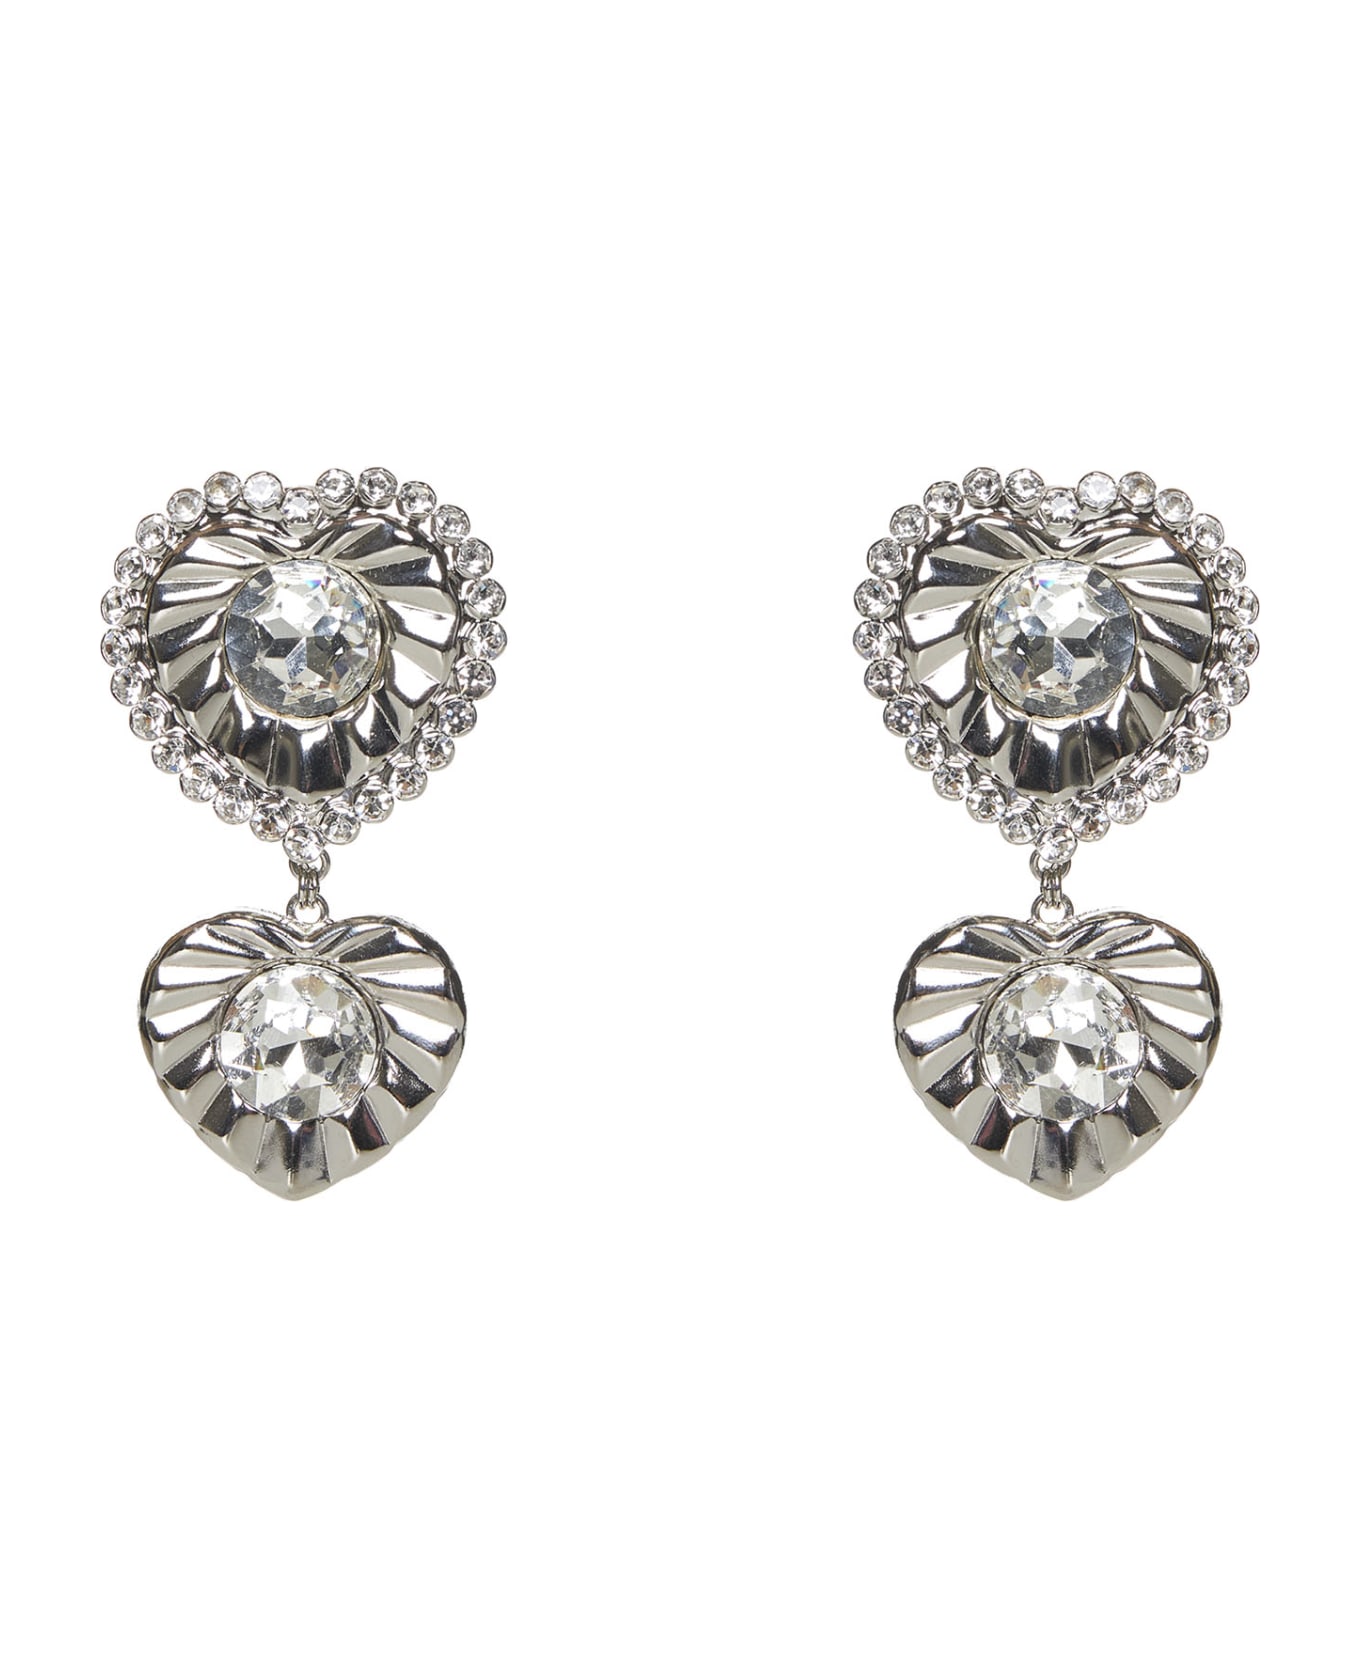 Alessandra Rich Earrings - Cry-silver イヤリング